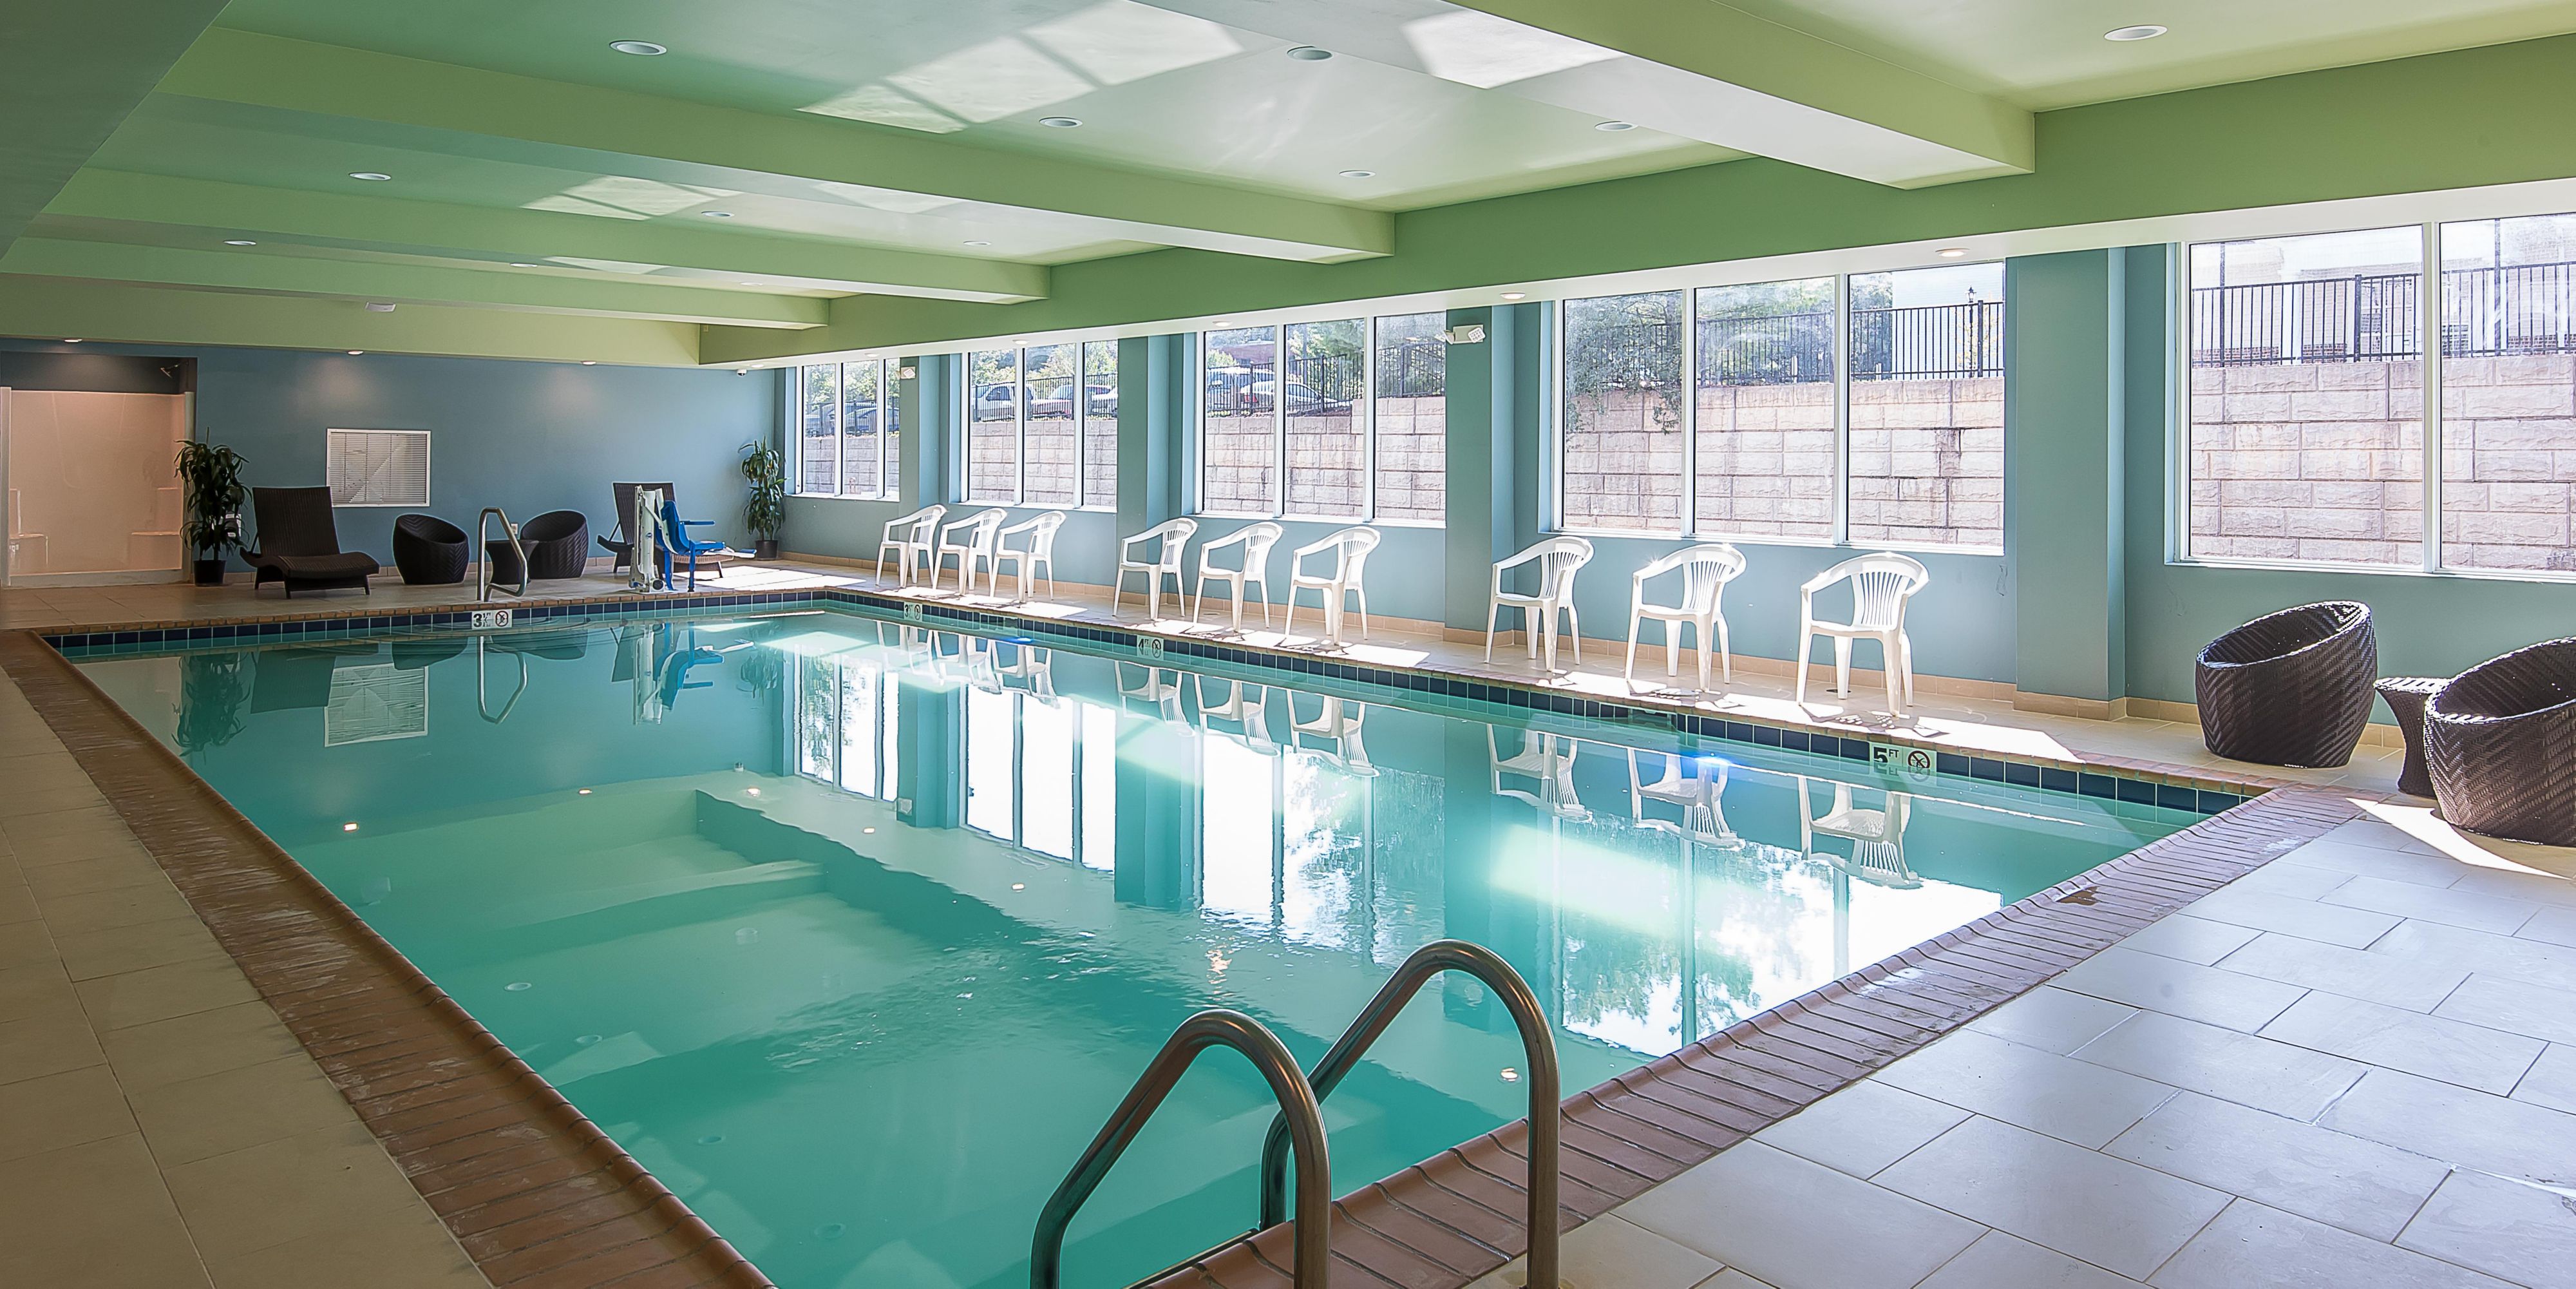 Our heated indoor pool is a great way for you to unwind after a long day of travel or work. All of our guests that are staying with us receive complementary access to our pool!!!